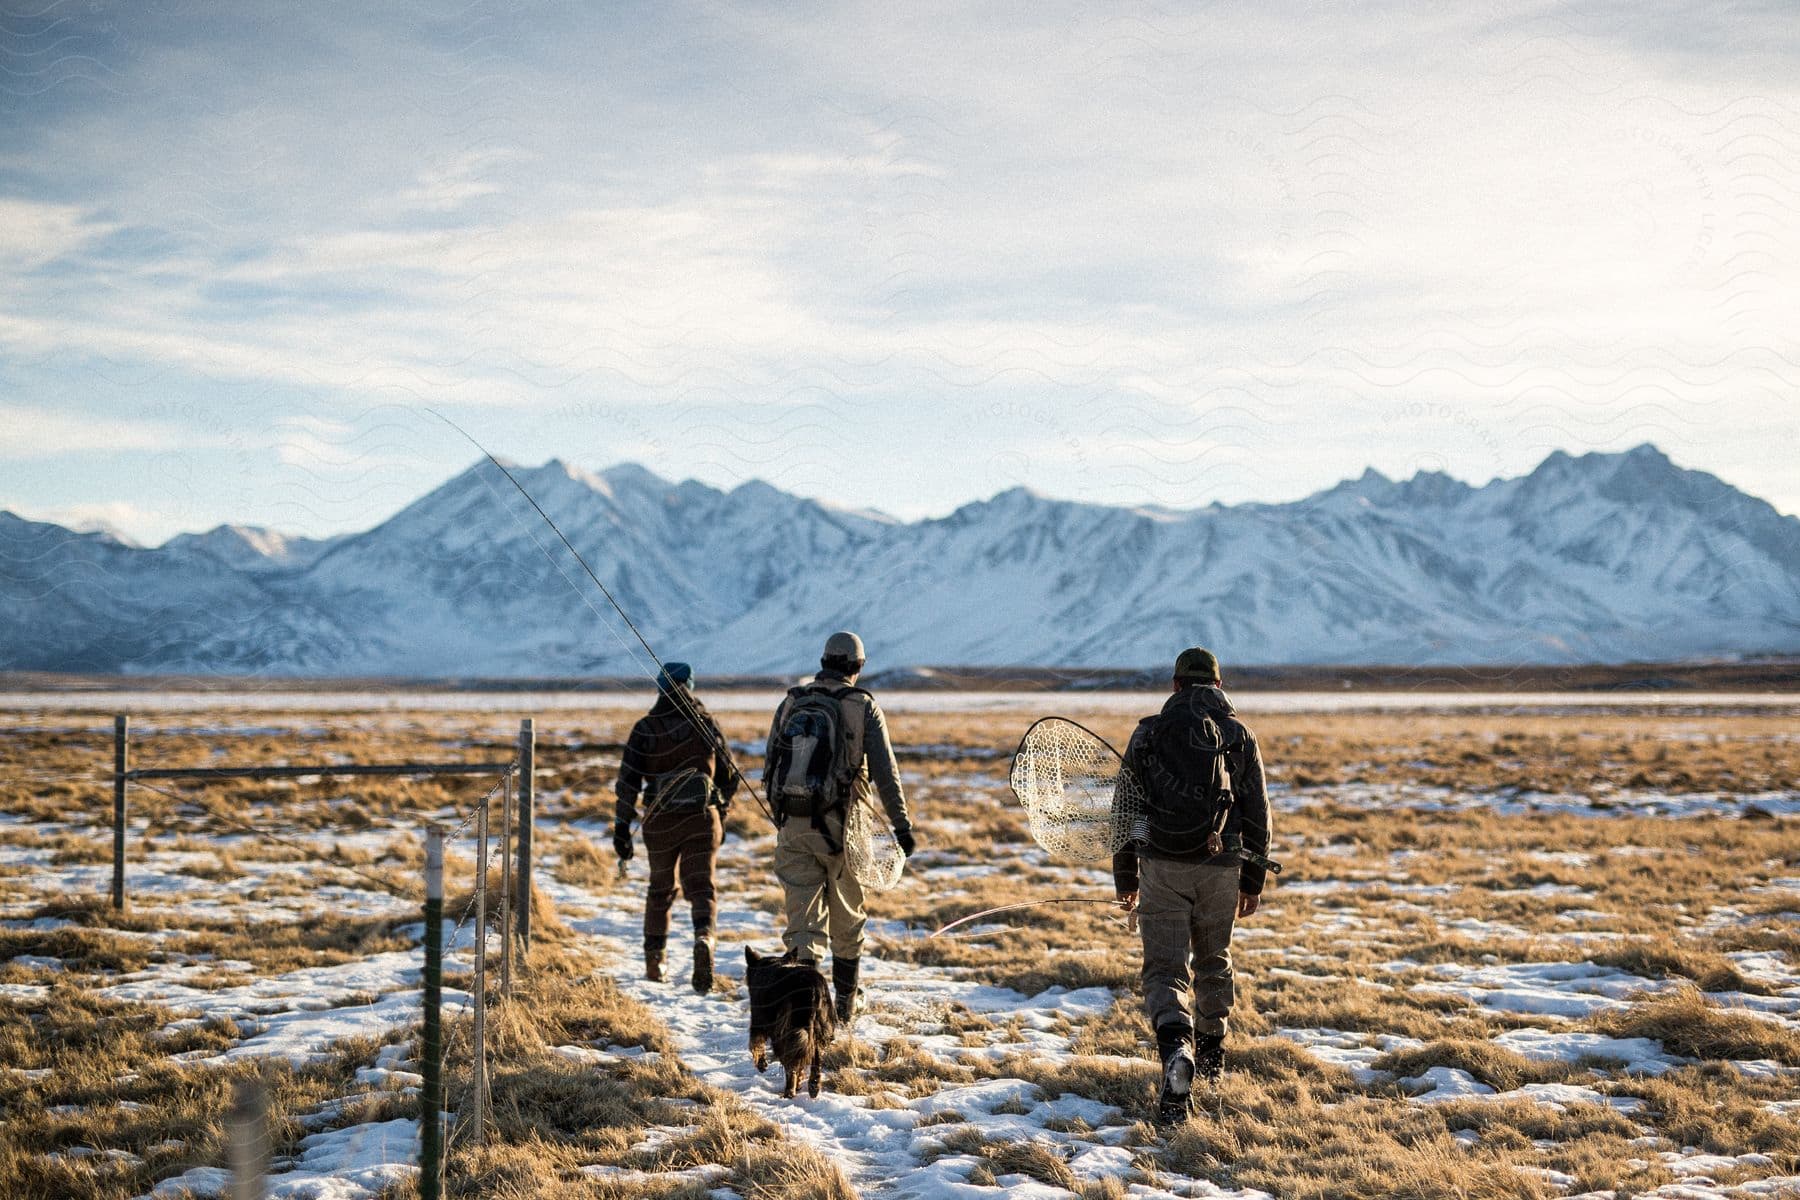 Three men with a dog walk across snow towards mountains on a cloudy day carrying fishing gear and backpacks